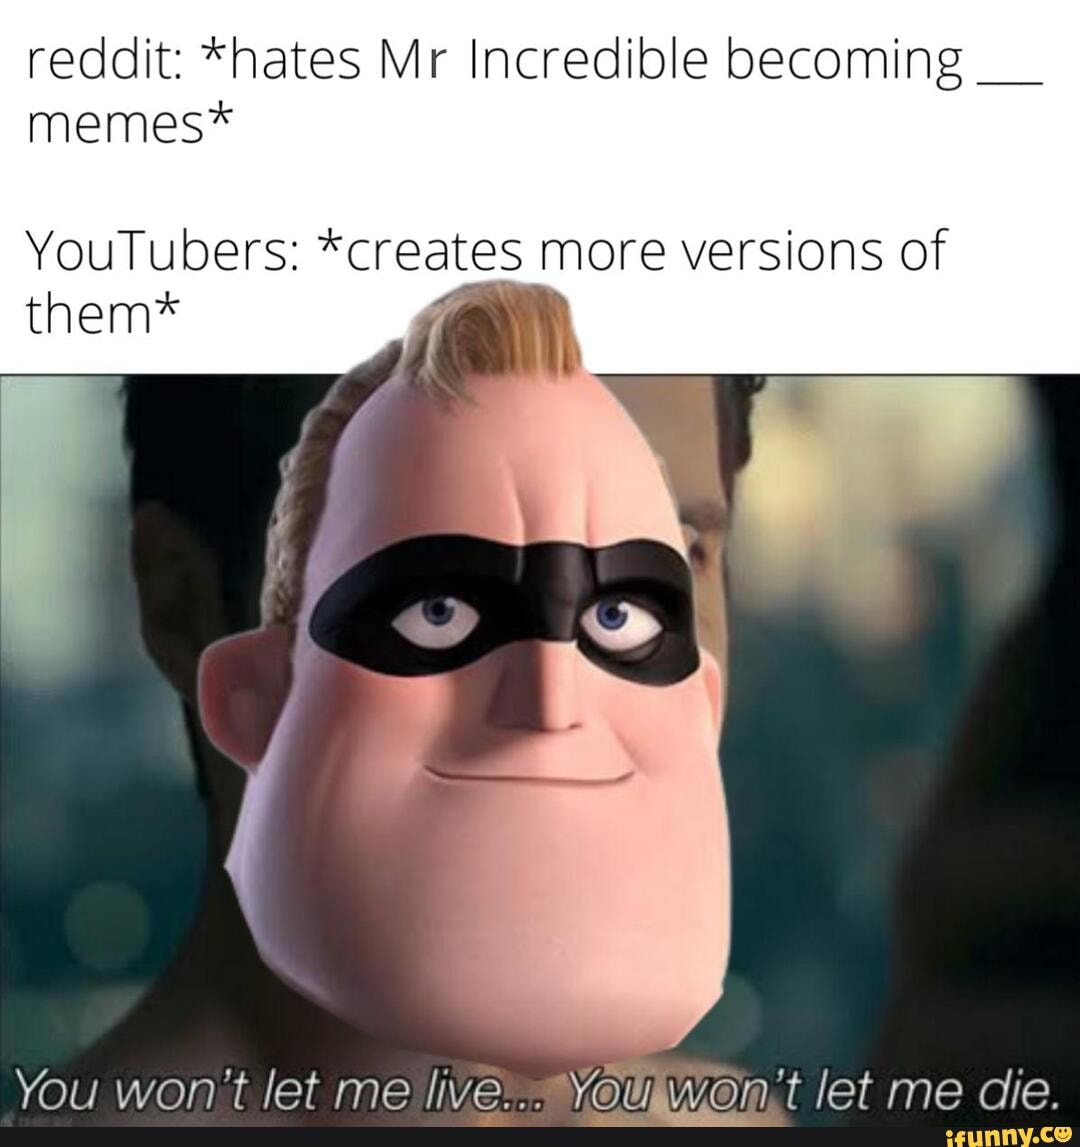 Reddit: *hates Mr Incredible becoming memes* rs: them* creates more  versions of them* won't let me live Yau wan't let me die. - iFunny